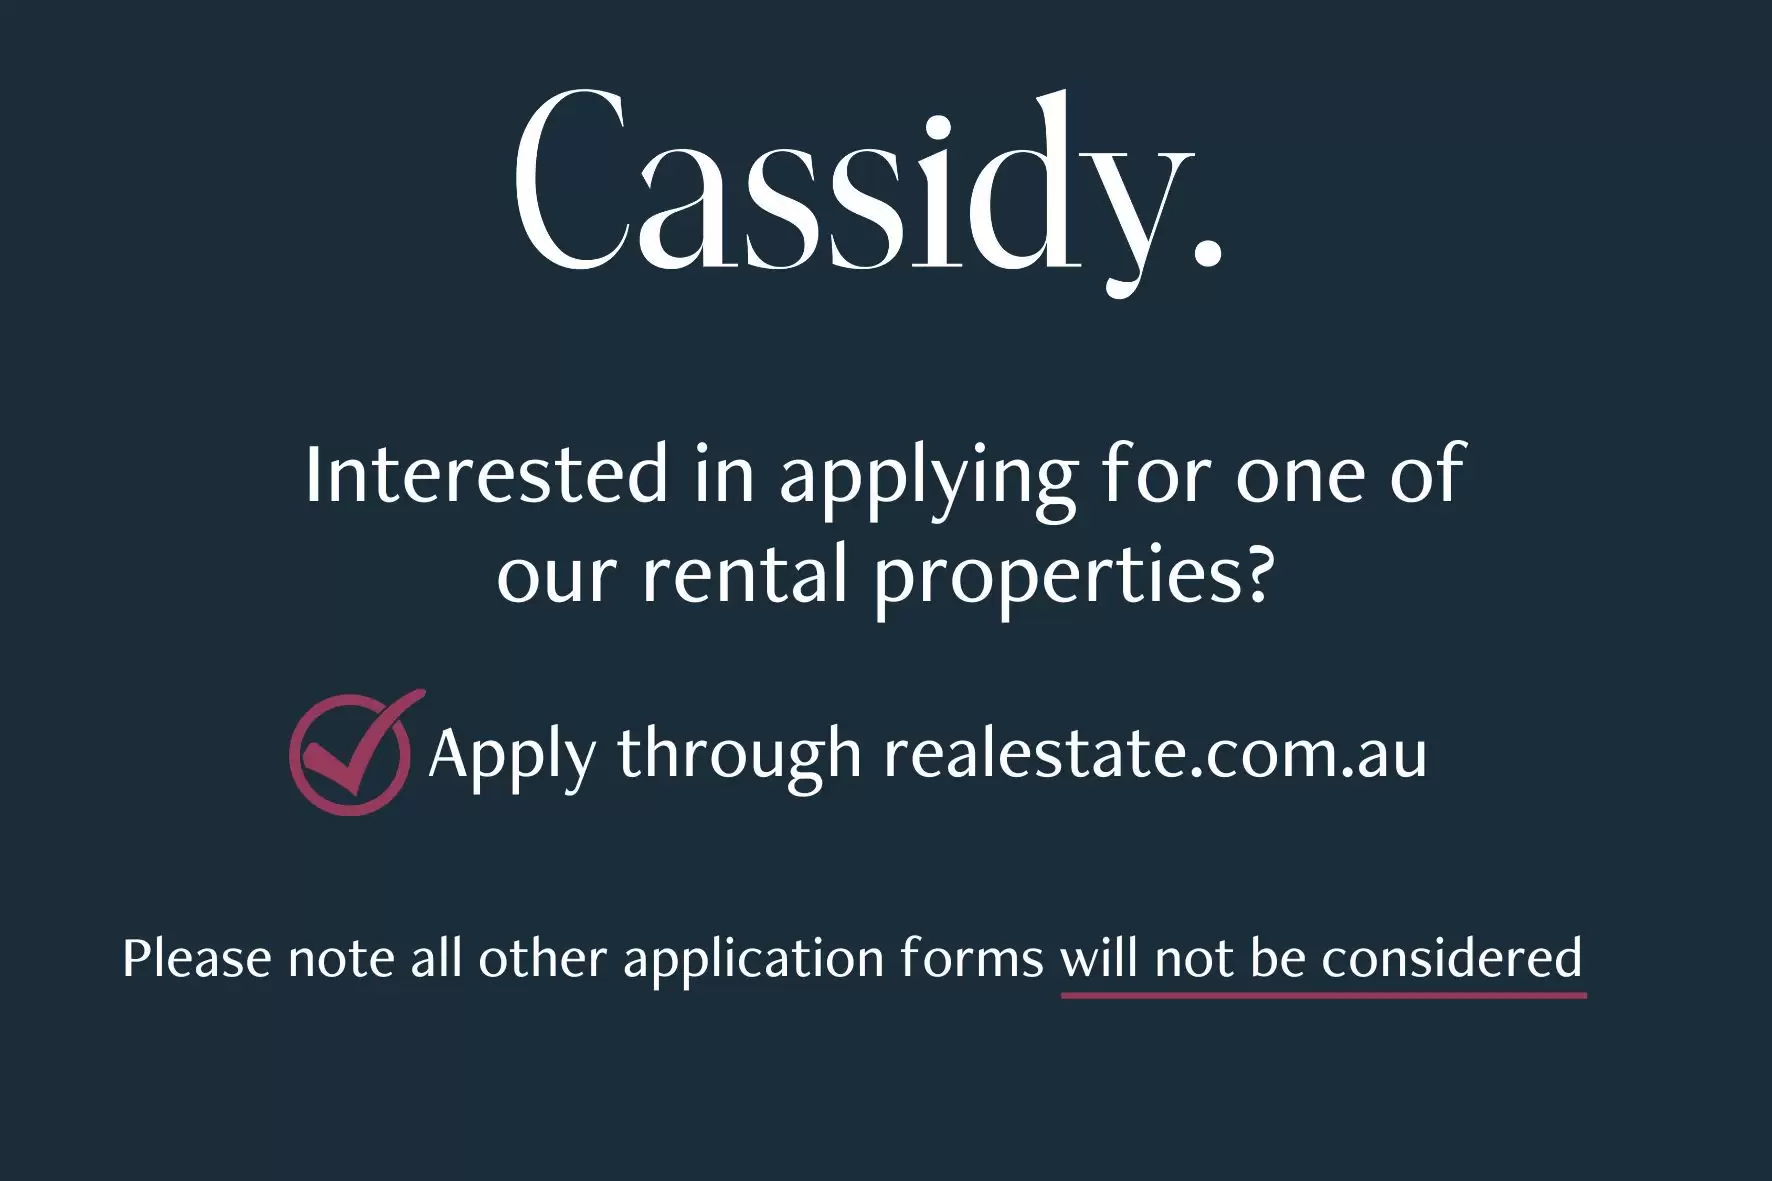 305S/1 Lardelli Drive, Ryde For Lease by Cassidy Real Estate - image 1